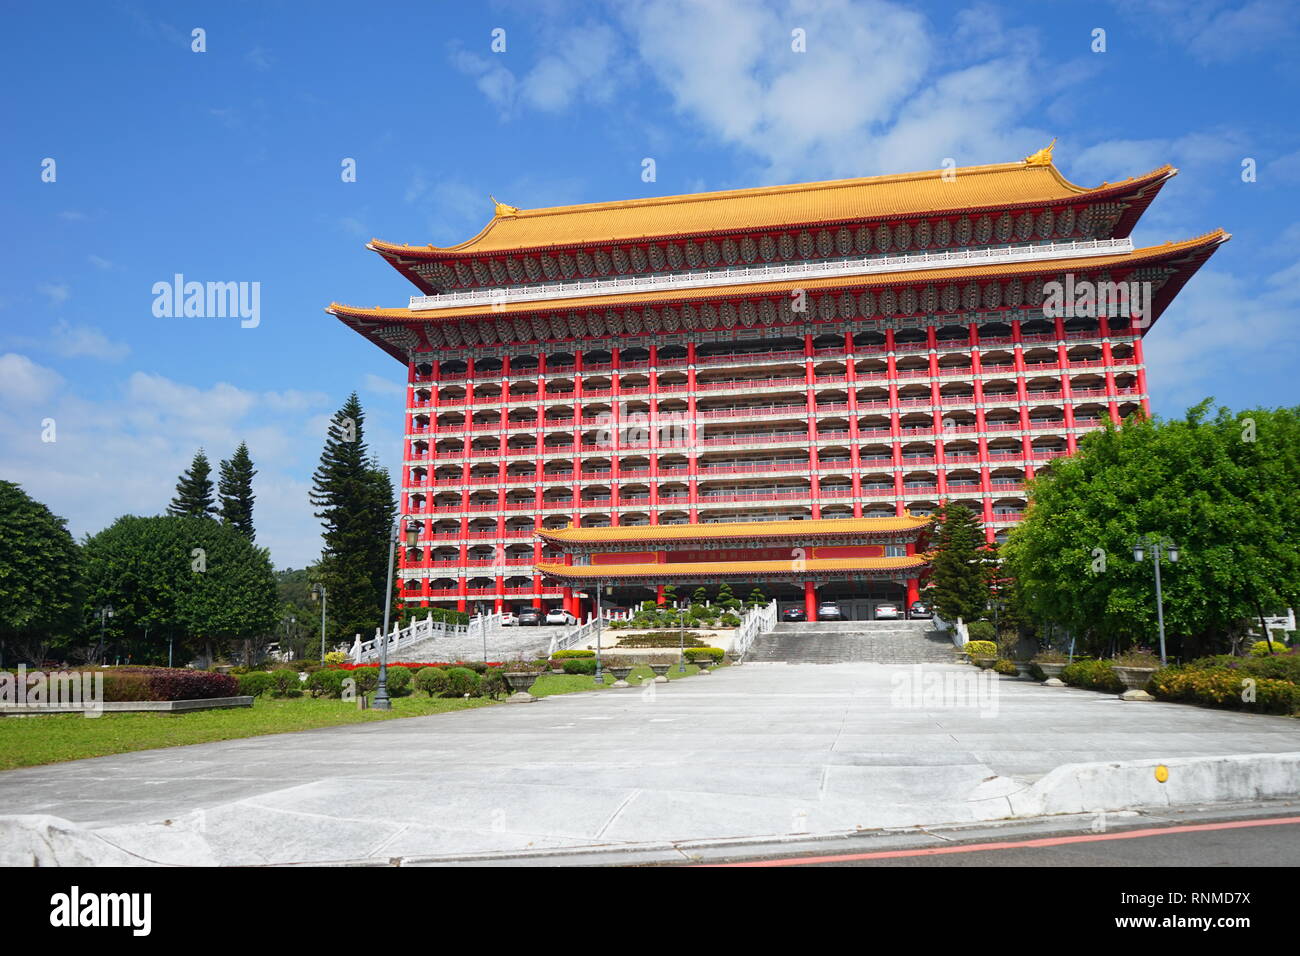 The entrance to the Grand Hotel(Yuanshan Great Hotel). This is the famous 5-star Chinese palace-style hotel in Taiwan. Stock Photo